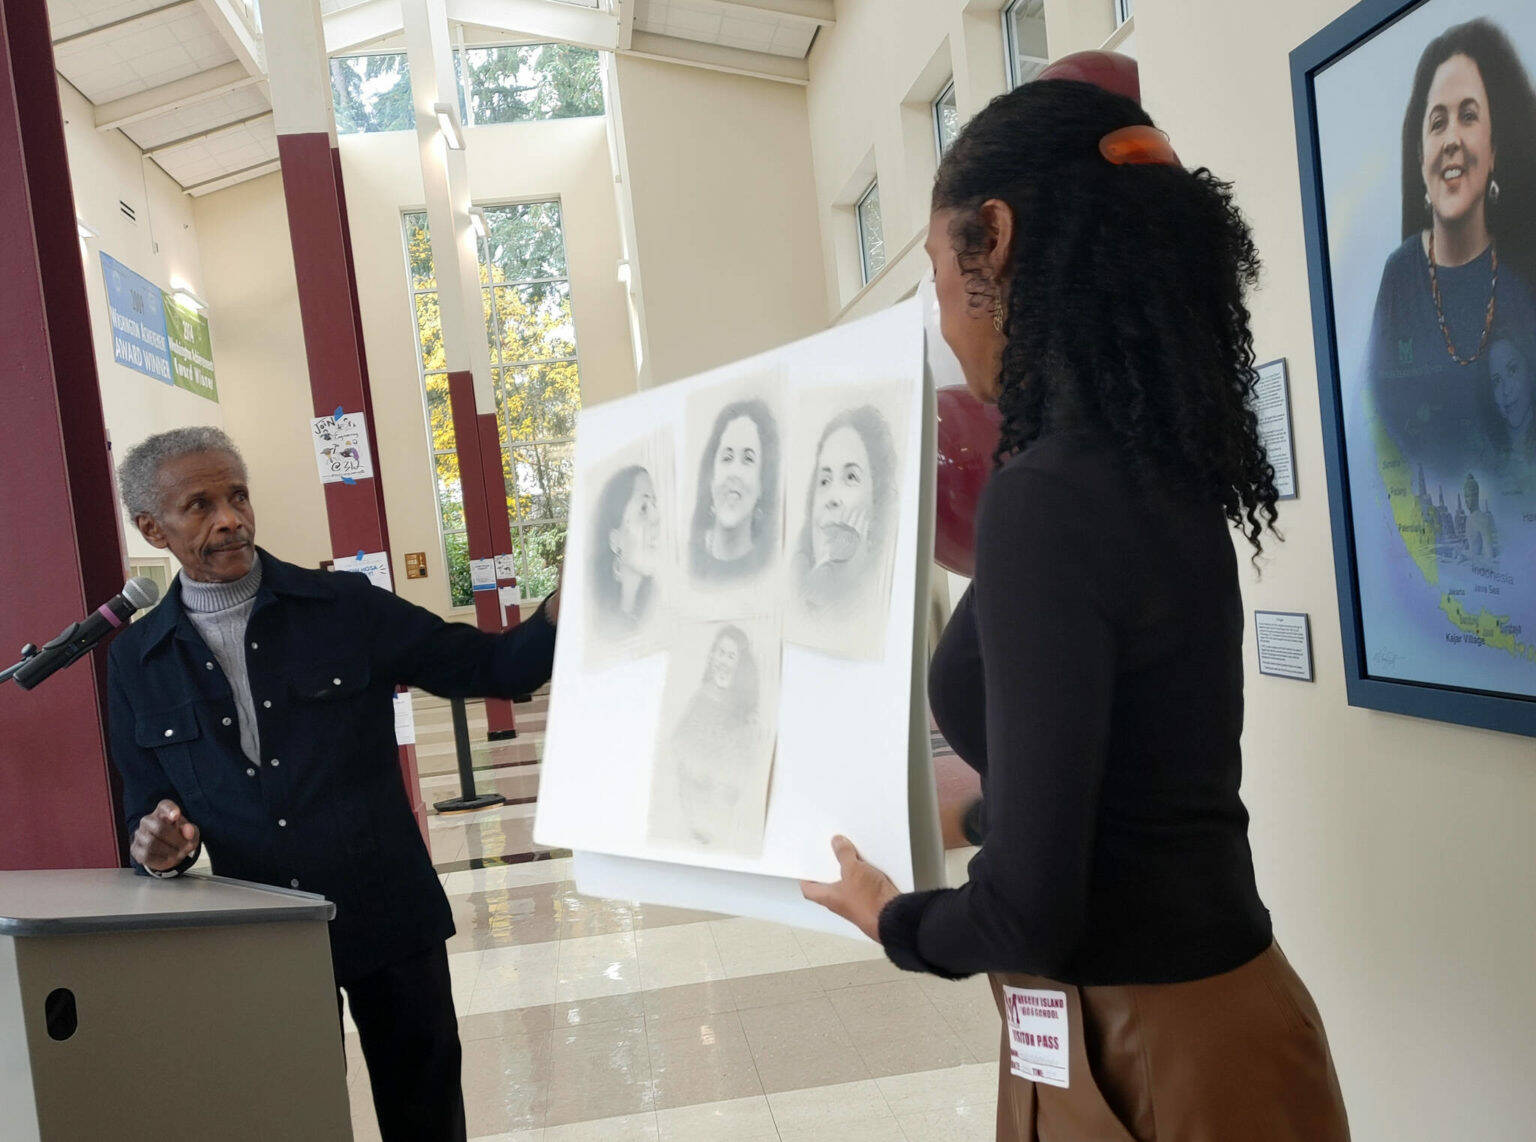 Artist Al Doggett is joined by Michelle Flowers-Taylor, board chair of the Stanley Ann Dunham Scholarship Fund, on Nov. 29, 2022, in describing his technique in drawing a portrait of Dr. Dunham that hangs (at right) in the foyer at Mercer Island High School. Andy Nystrom/ staff photo